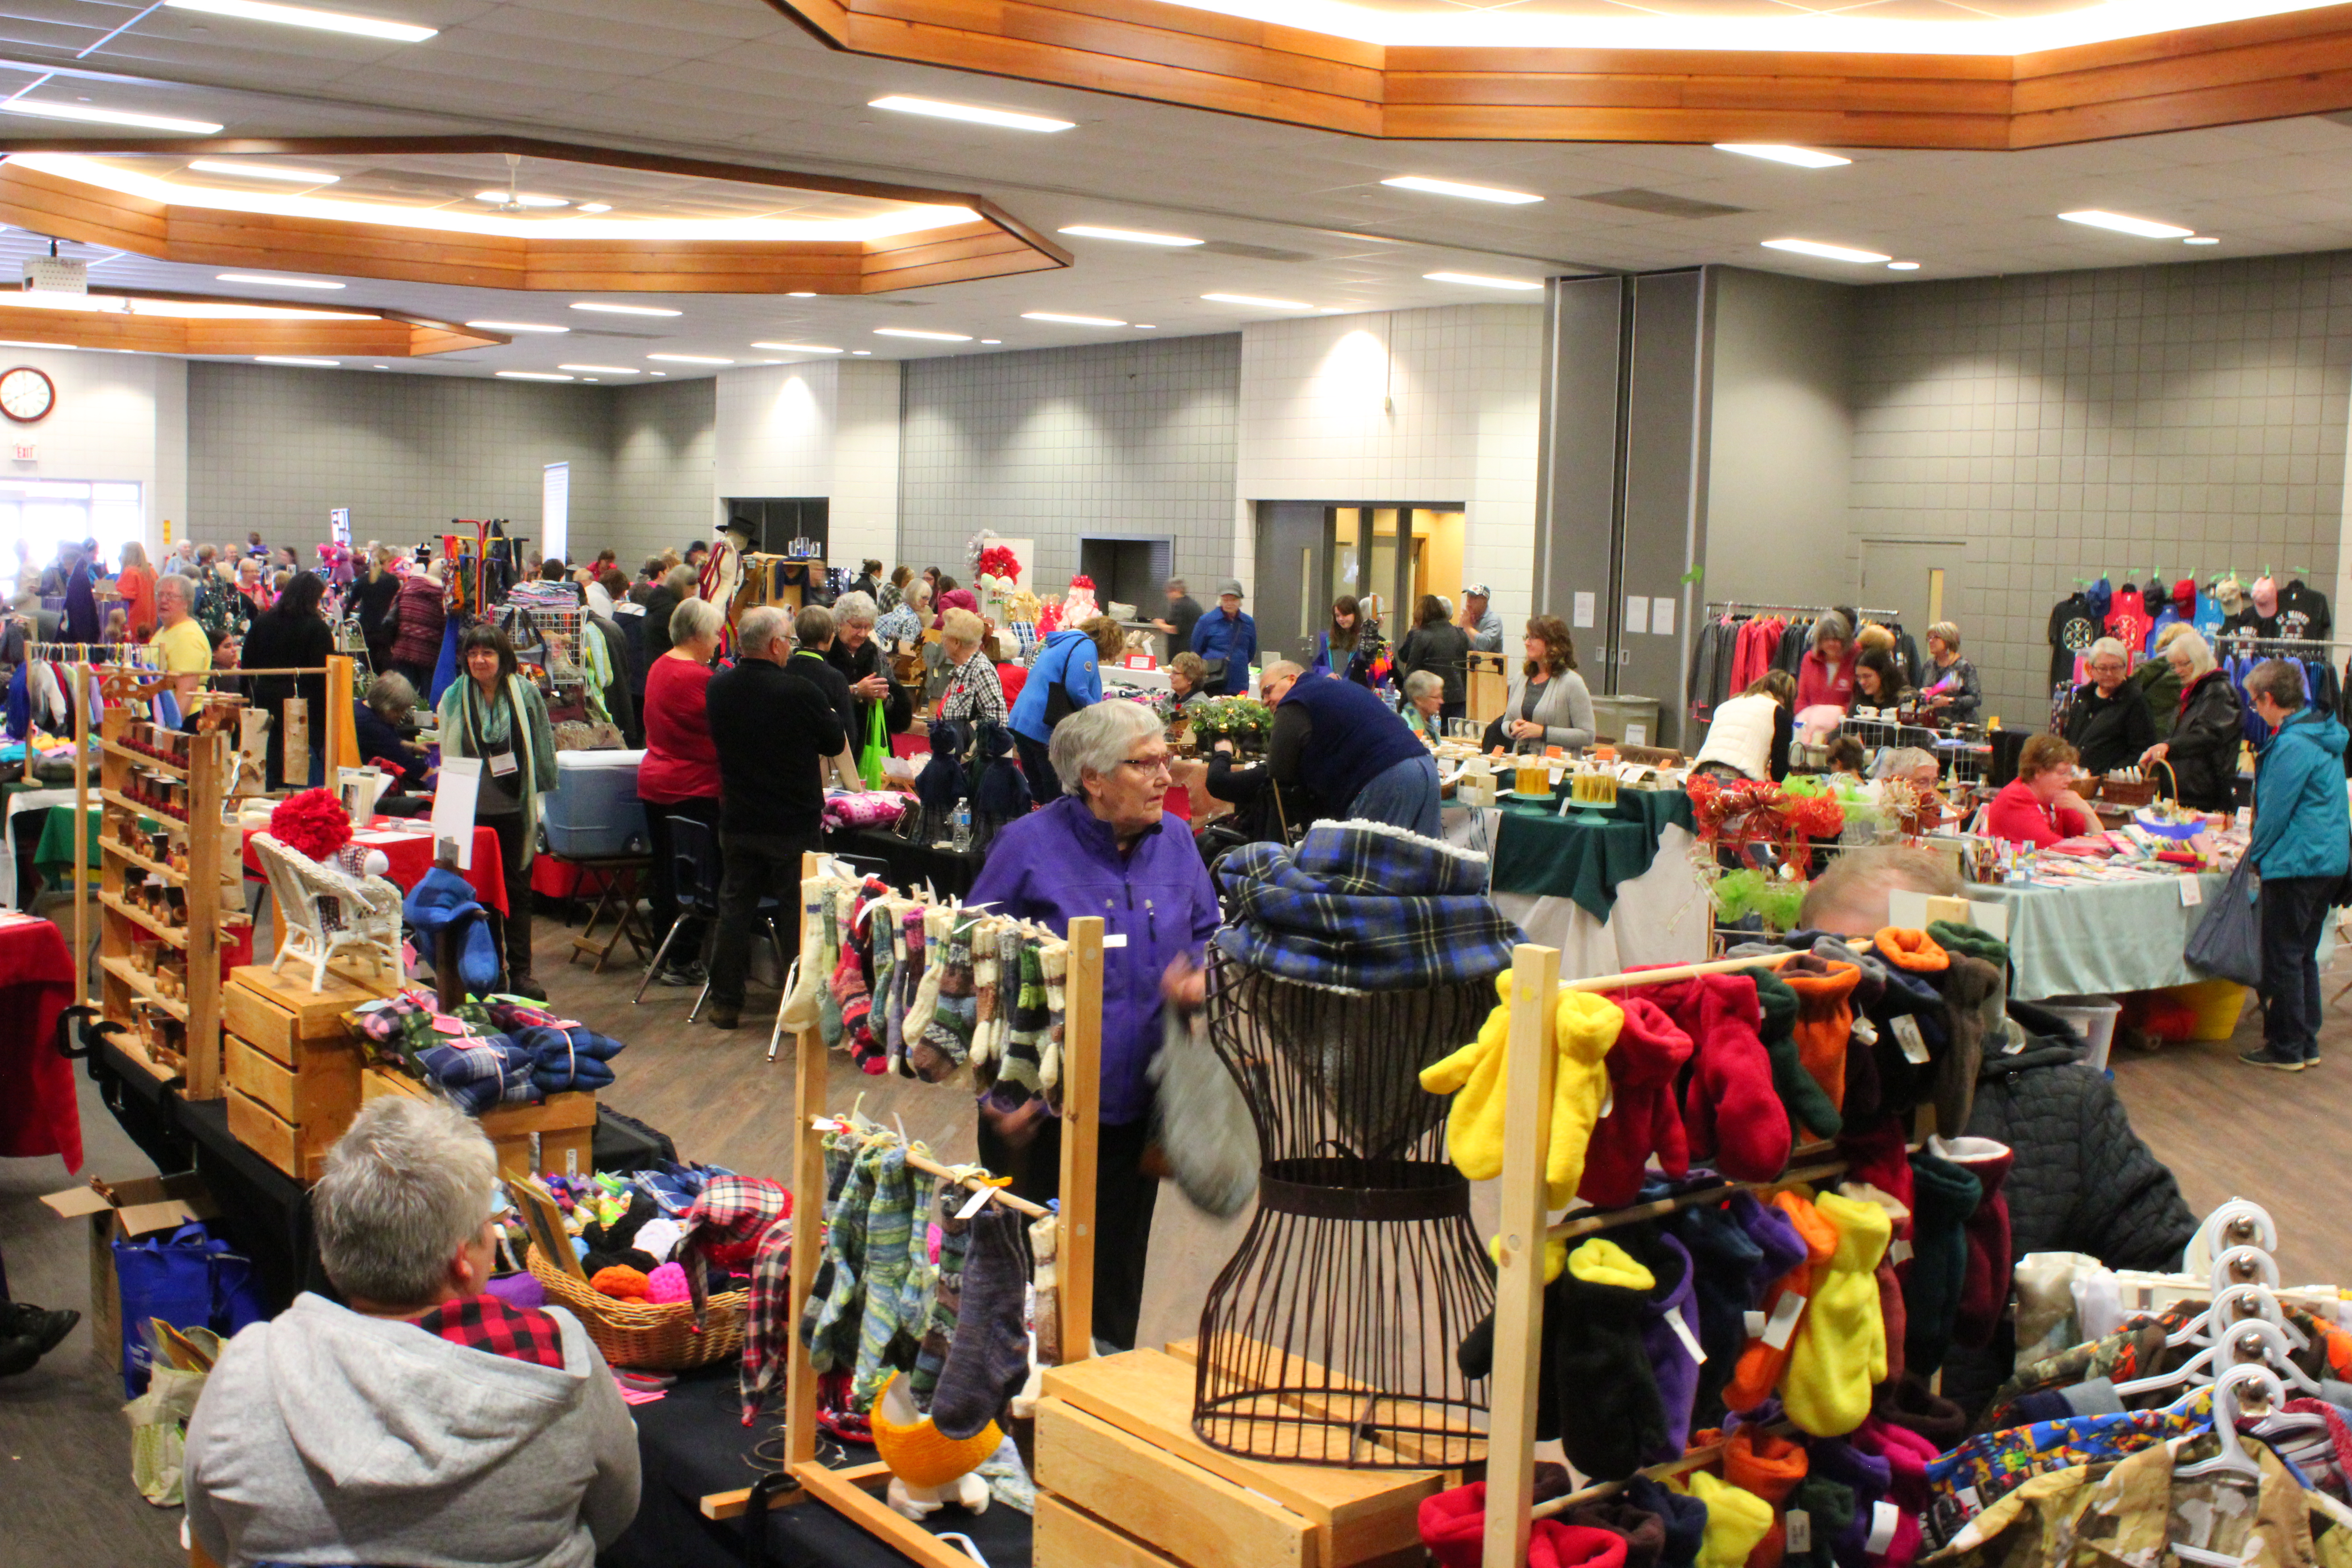 People shopping at a Craft Show event